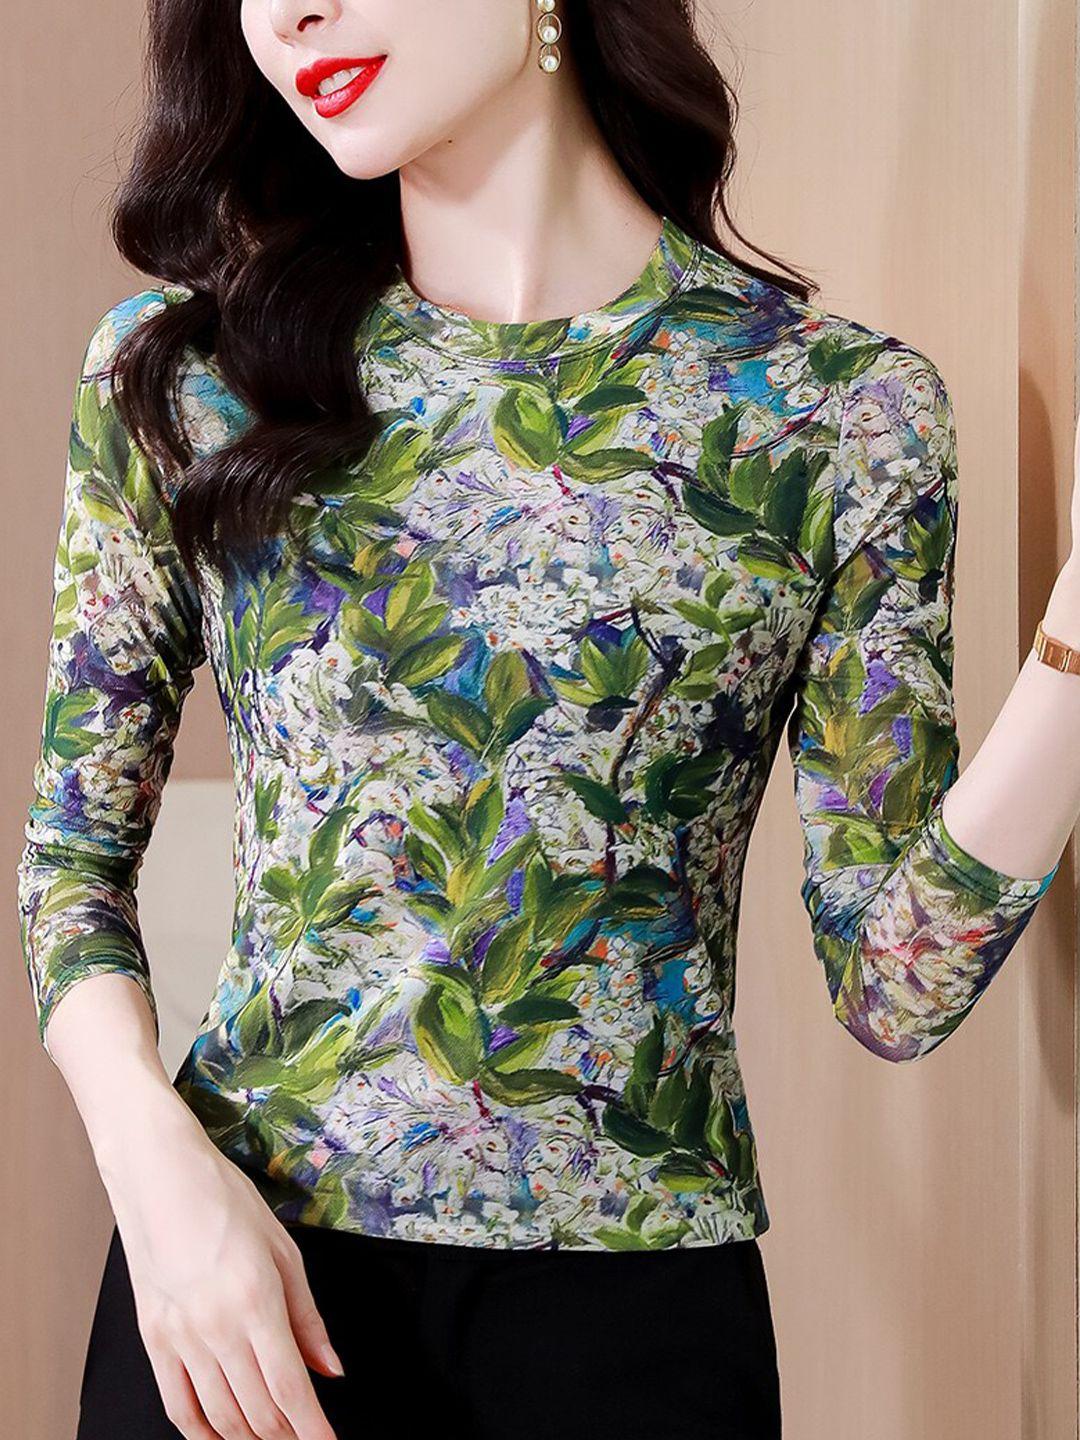 jc mode floral printed high neck long sleeves top